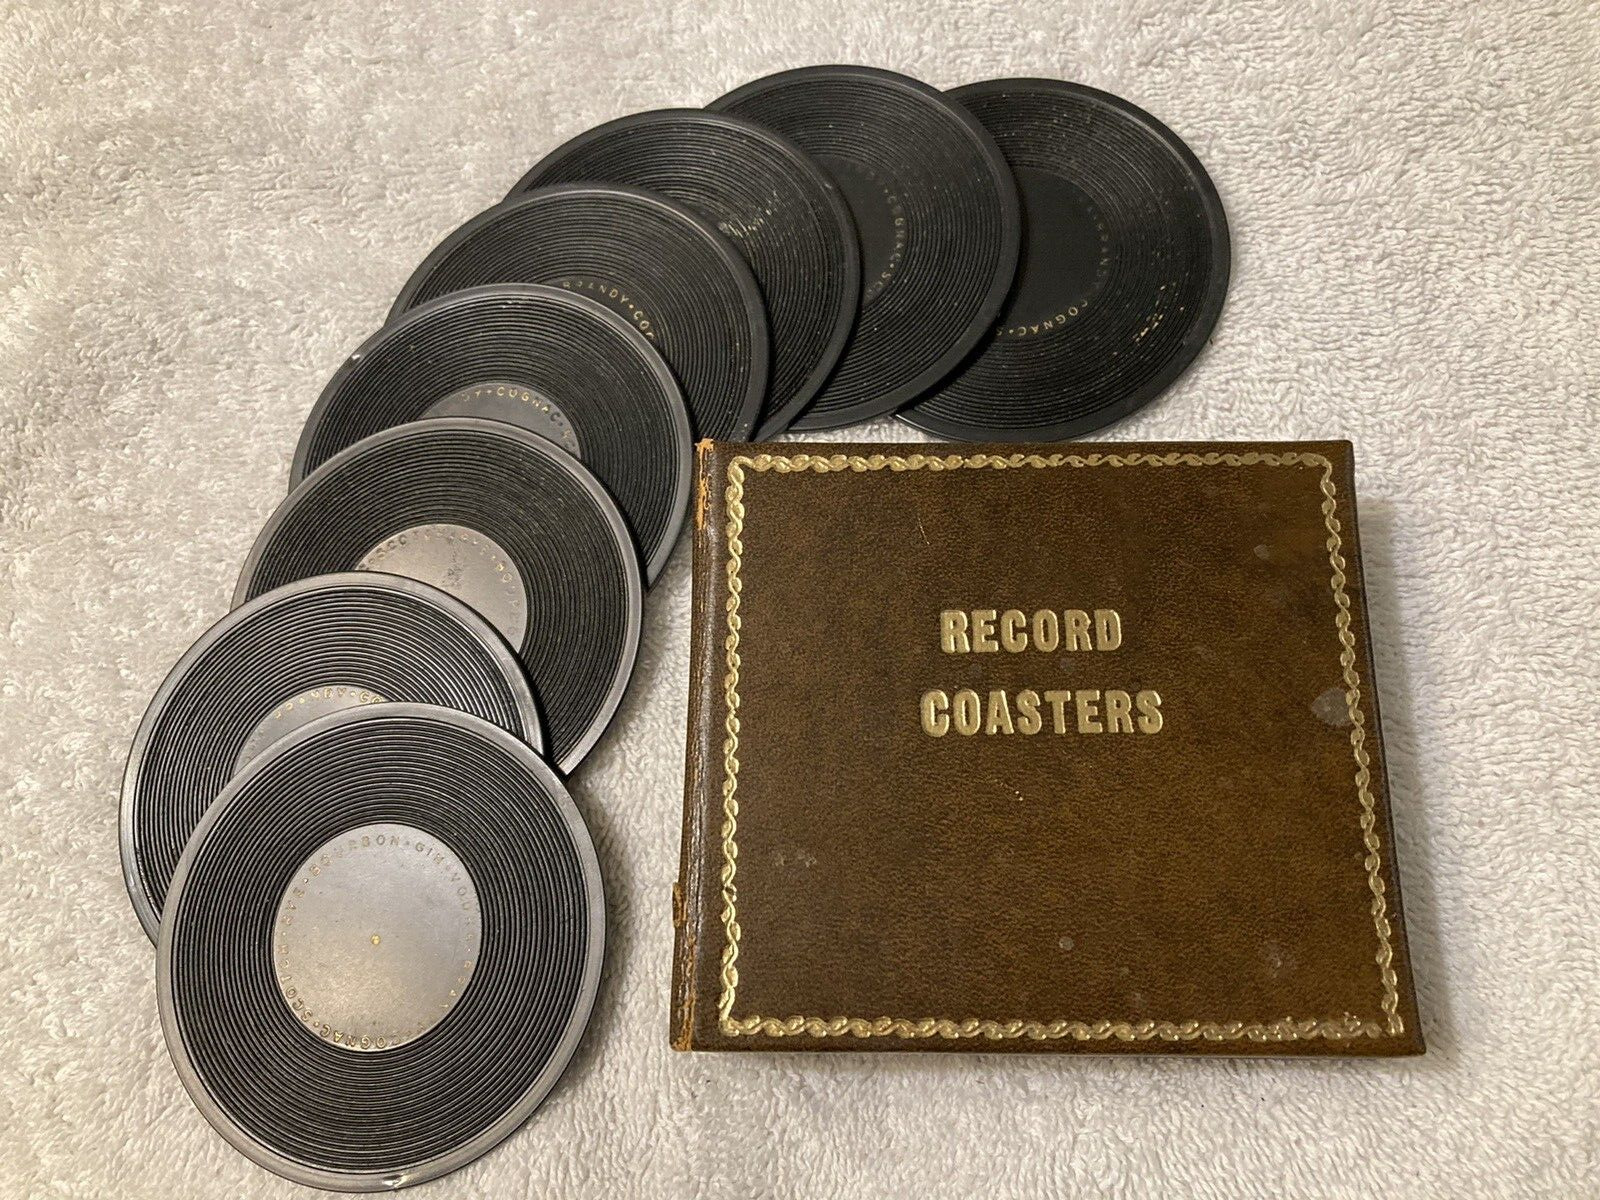 Vintage Record Style Coasters in Storage Book/Album Complete Set of 8.